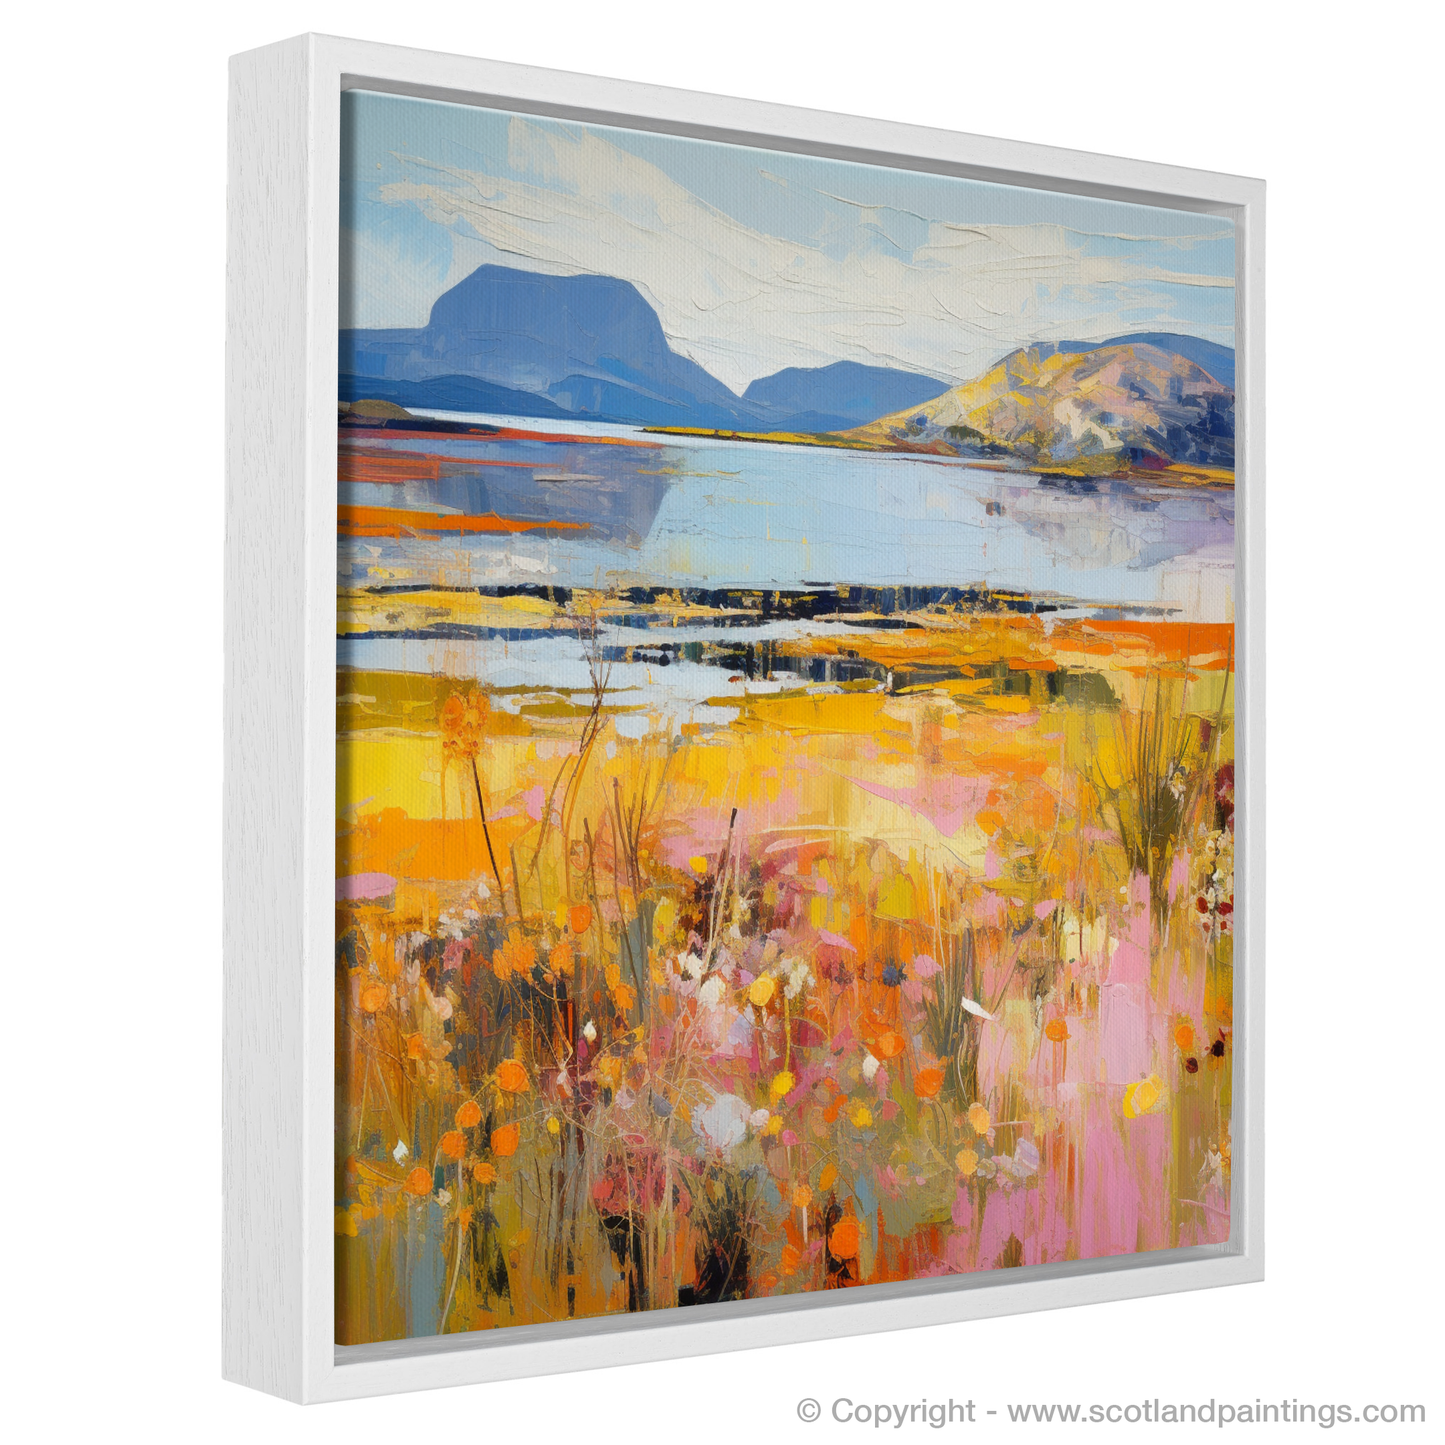 Painting and Art Print of Isle of Raasay, Inner Hebrides in summer entitled "Summer Serenity on the Isle of Raasay".